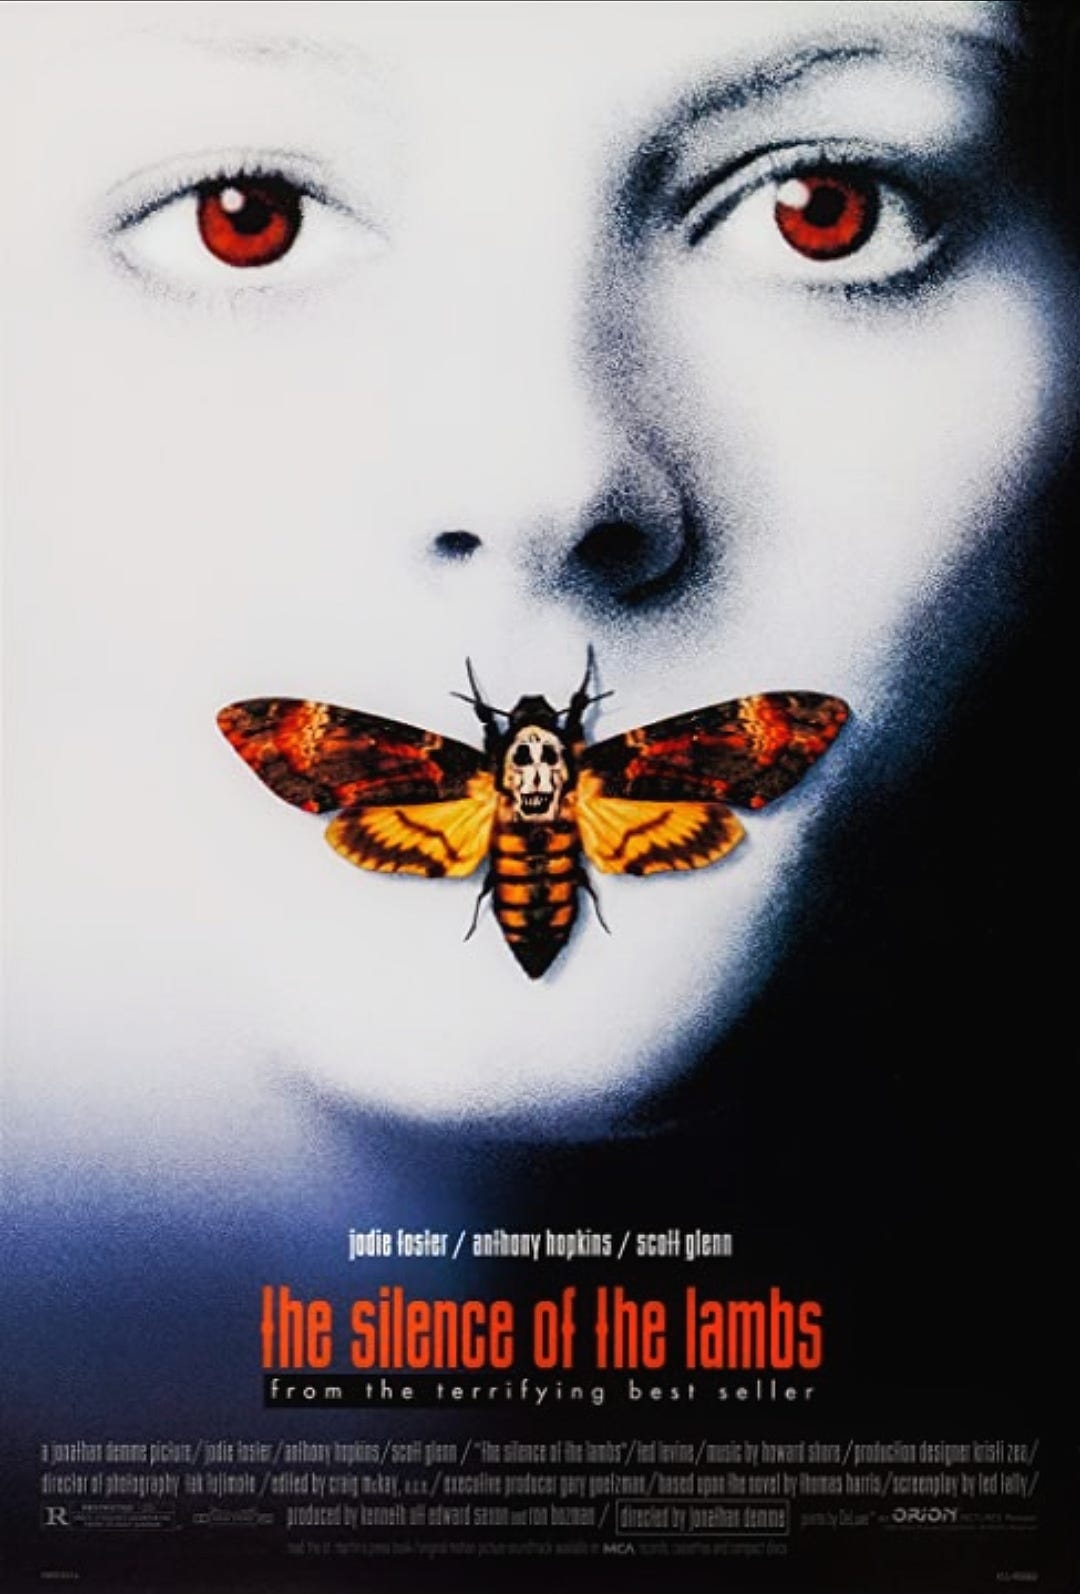 An eldritch anecdote of death's-head hawkmoth from The Silence of the Lambs  | Journal of Geek Studies